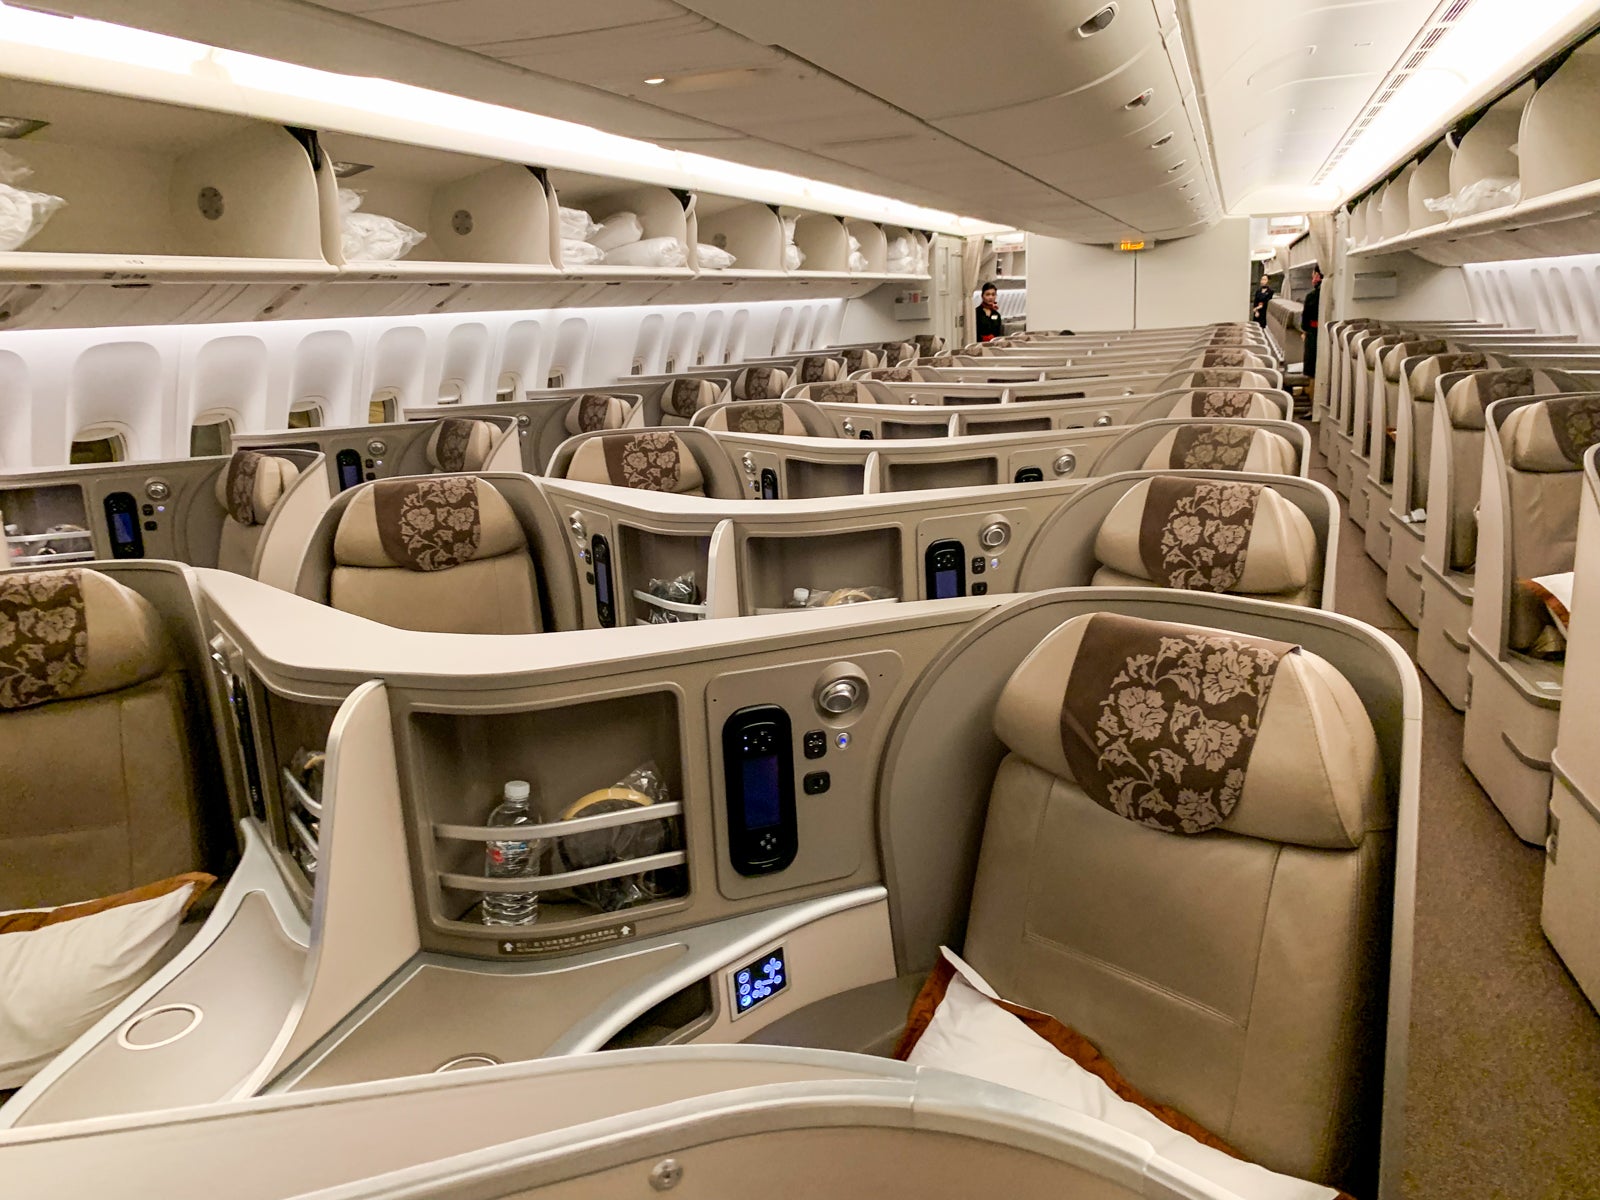 China Eastern Airlines business class